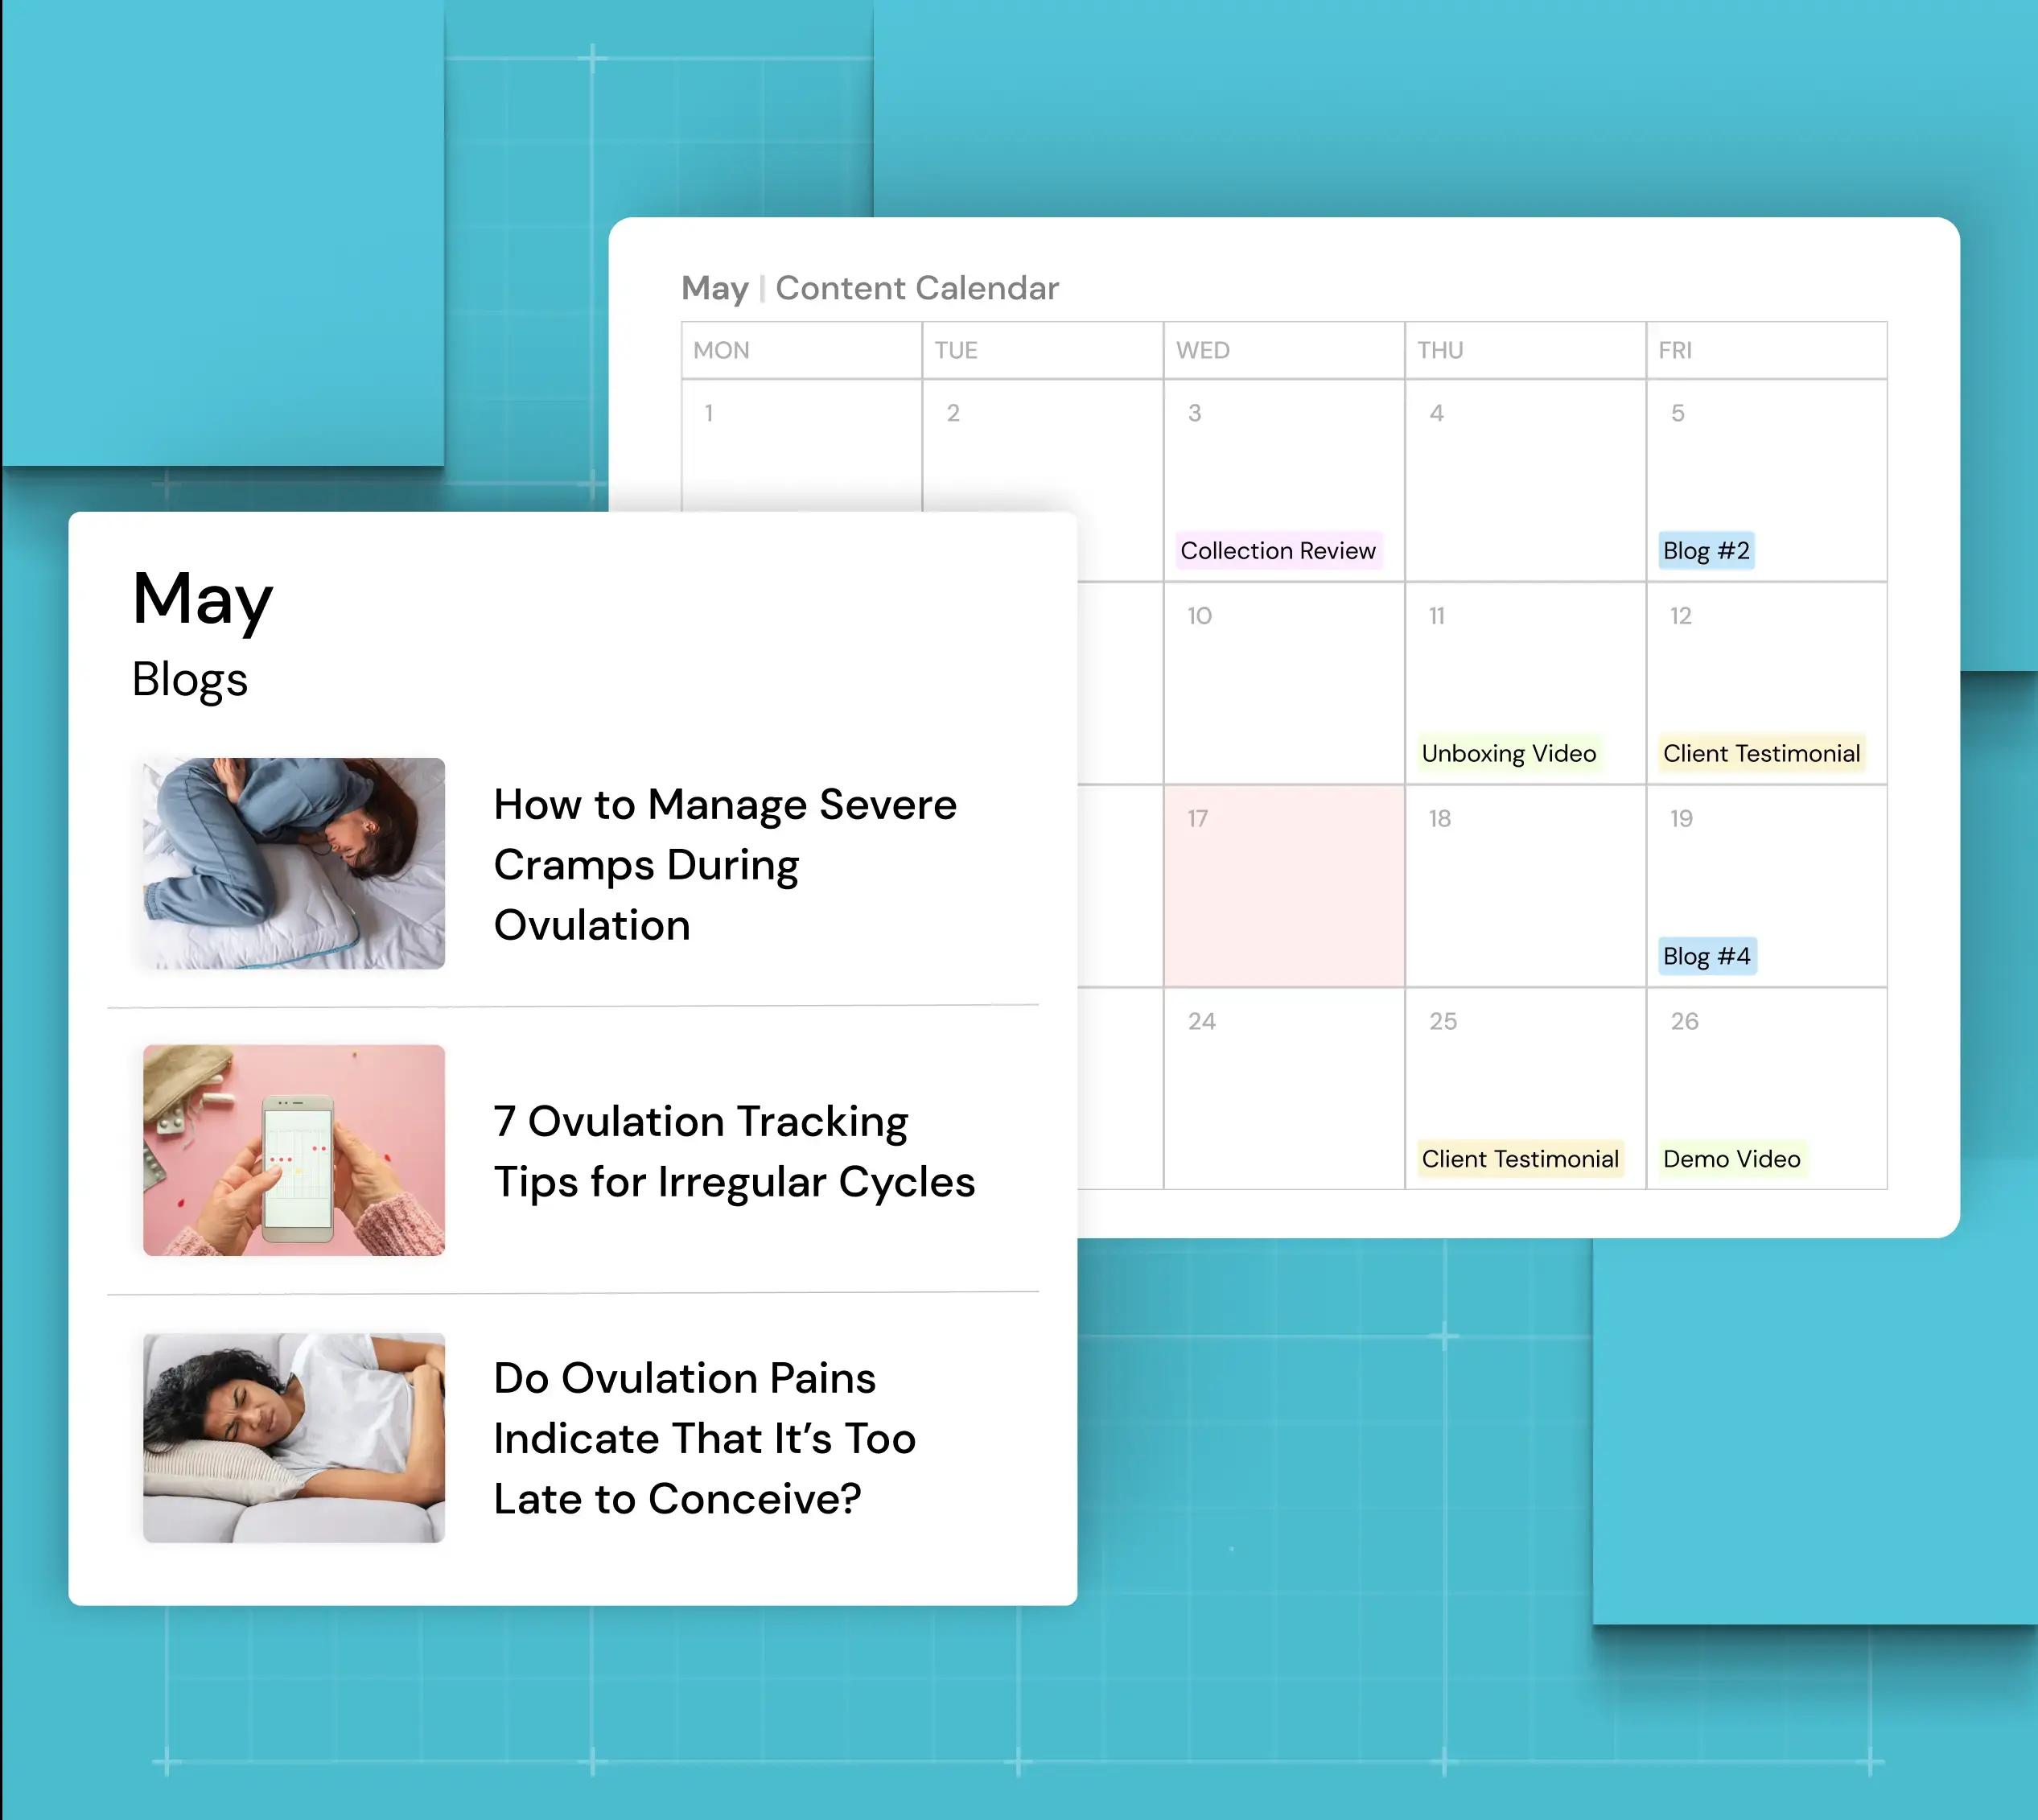 Generate detailed content calendars in advance